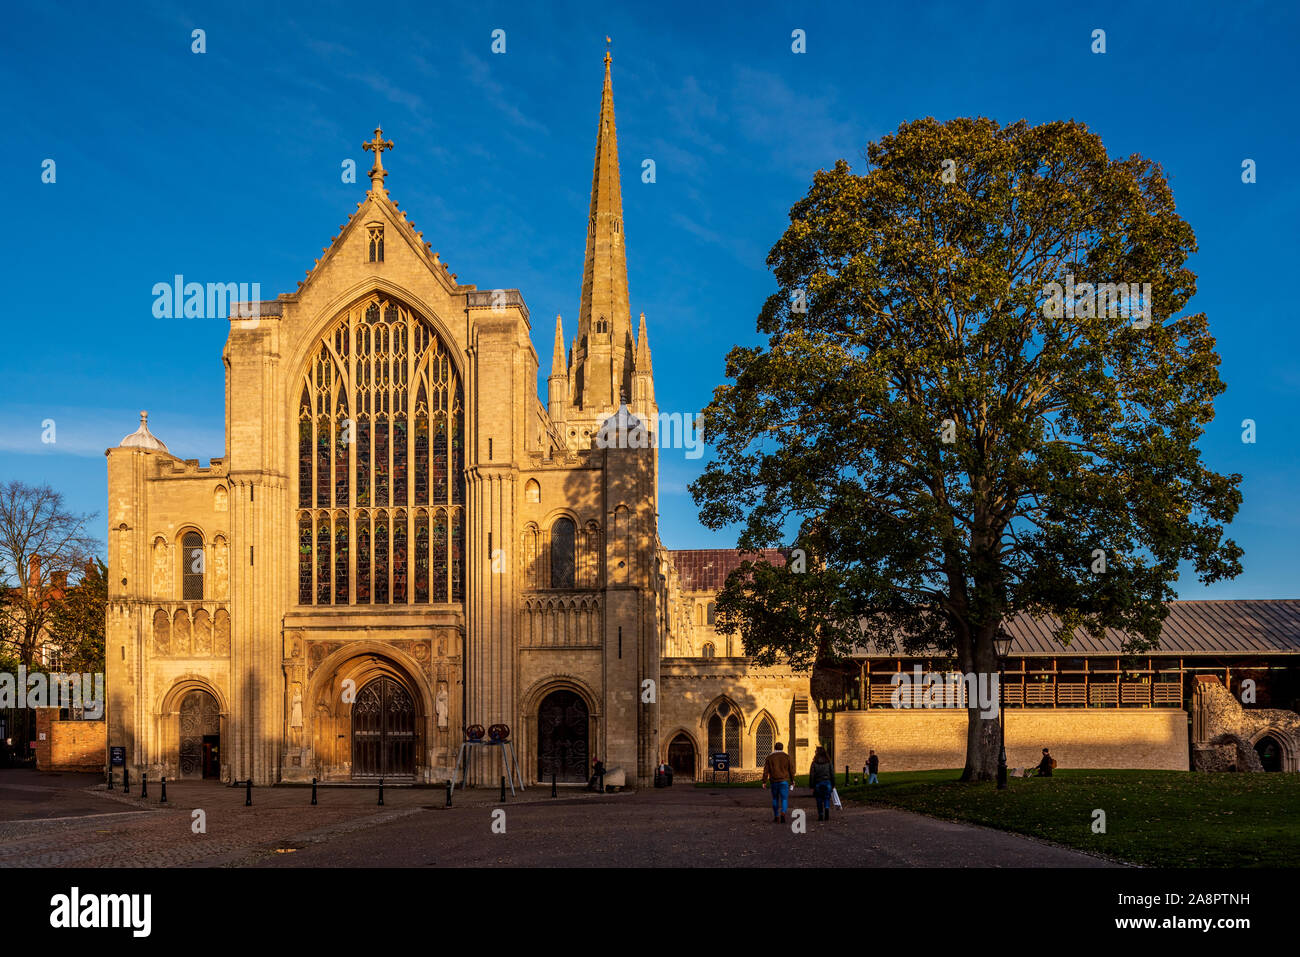 Norwich Cathedral in Norwich UK - work started on Norwich Cathedral in 1096, completed in 1145. Cathedral Church of the Holy and Undivided Trinity. Stock Photo